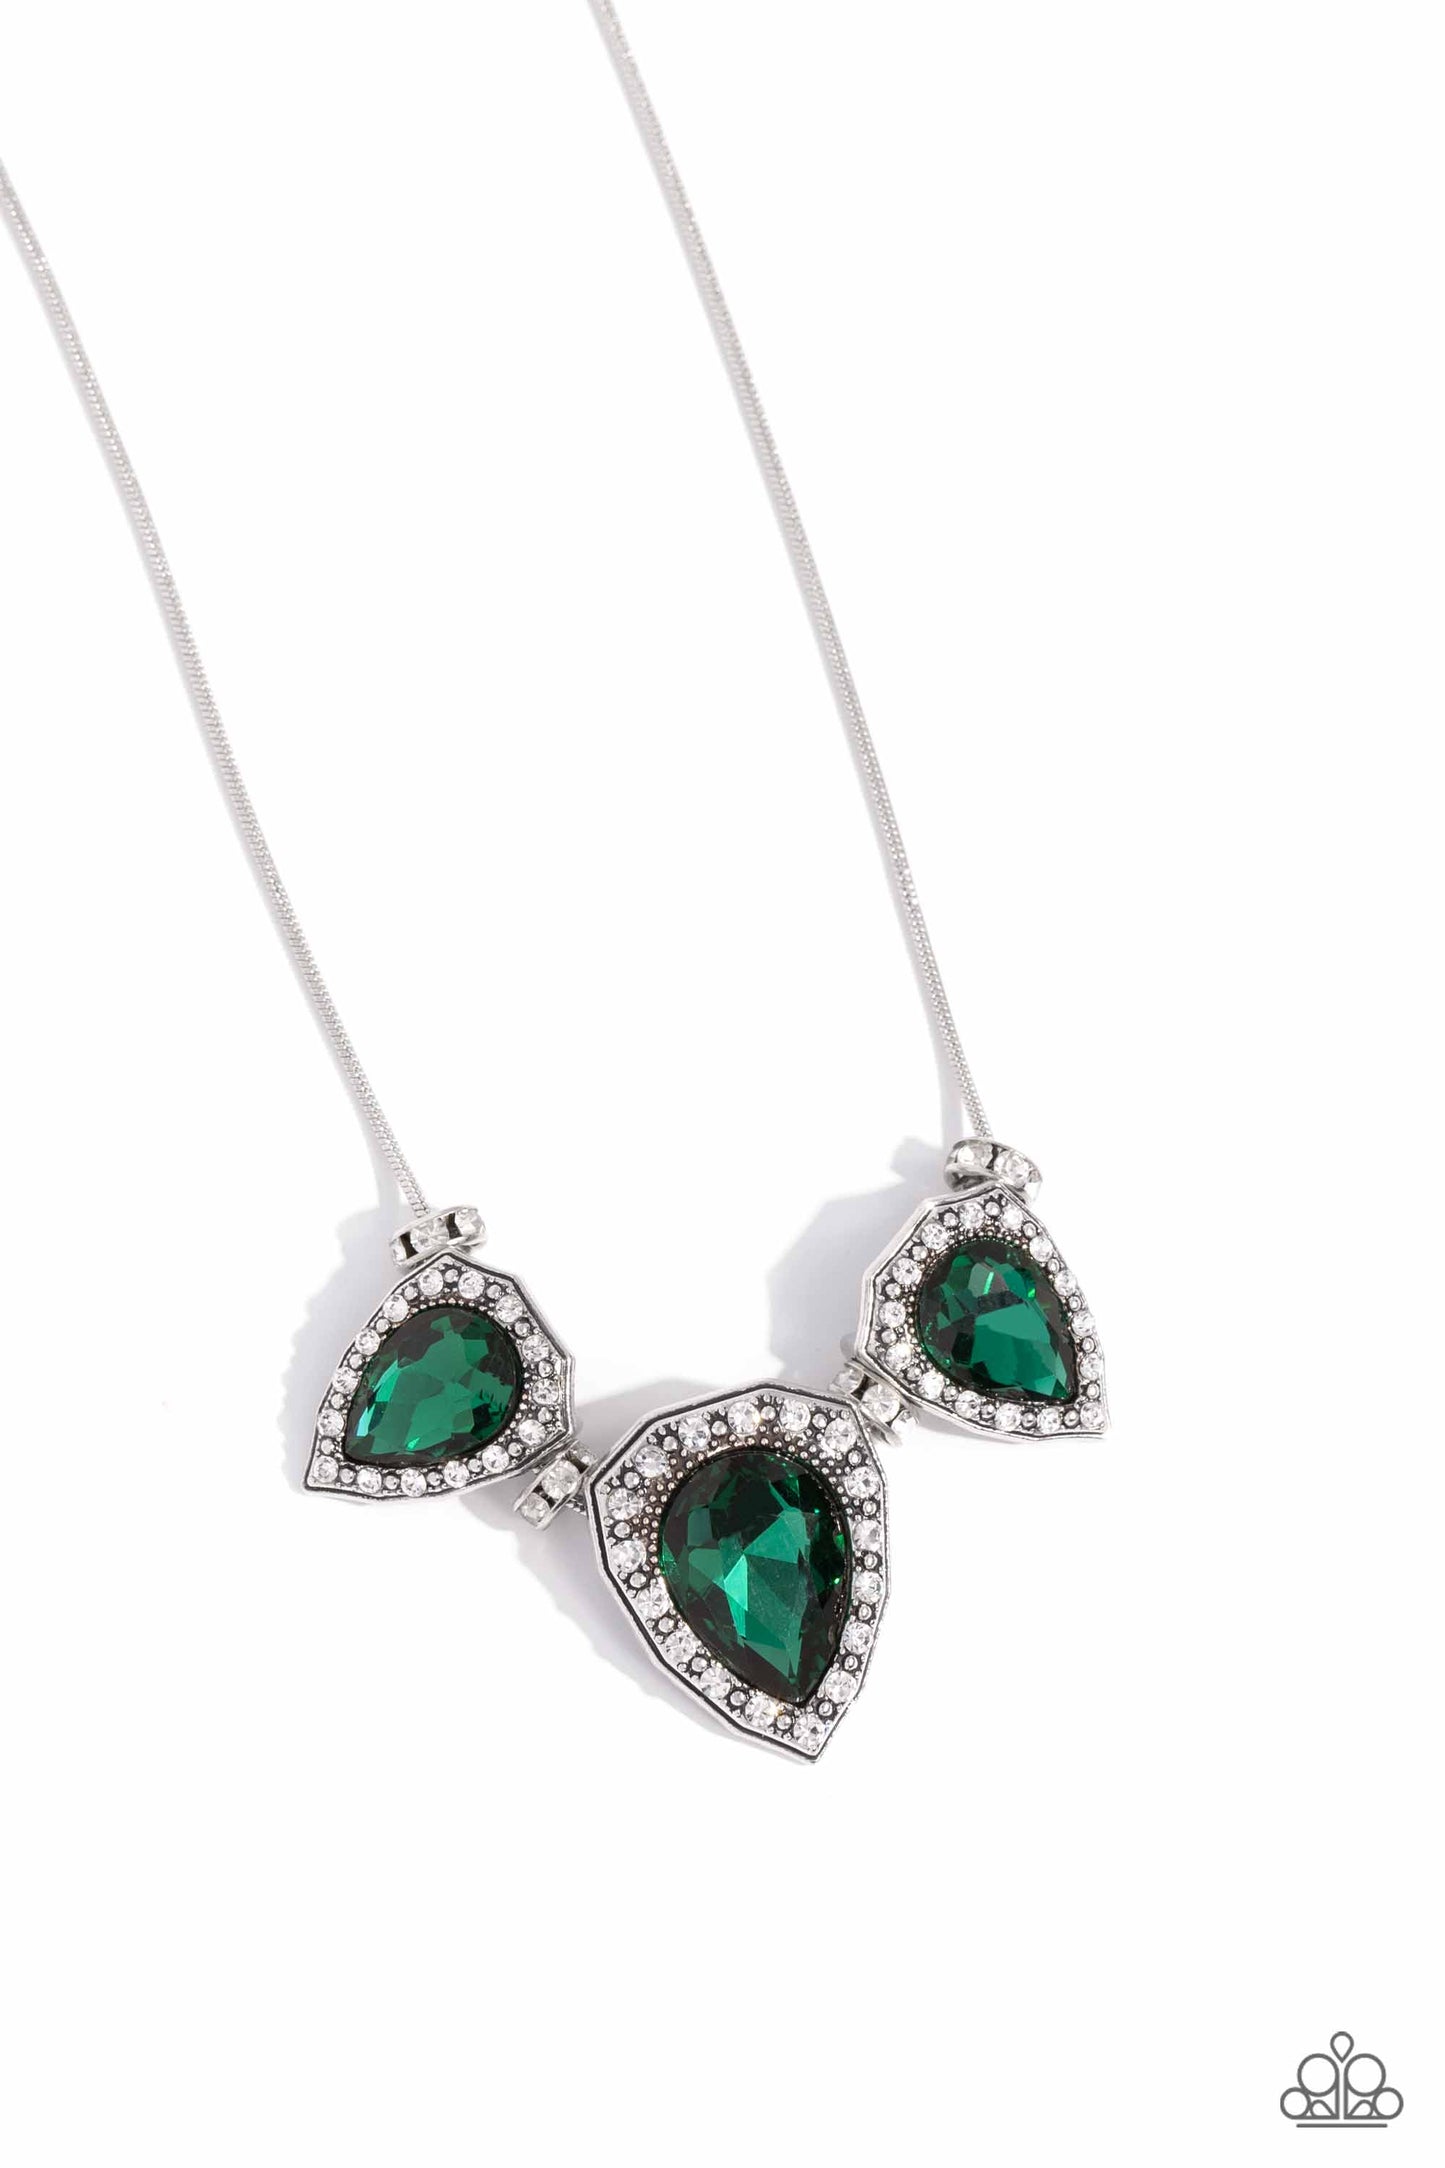 Majestic Met Ball - green - Paparazzi necklace